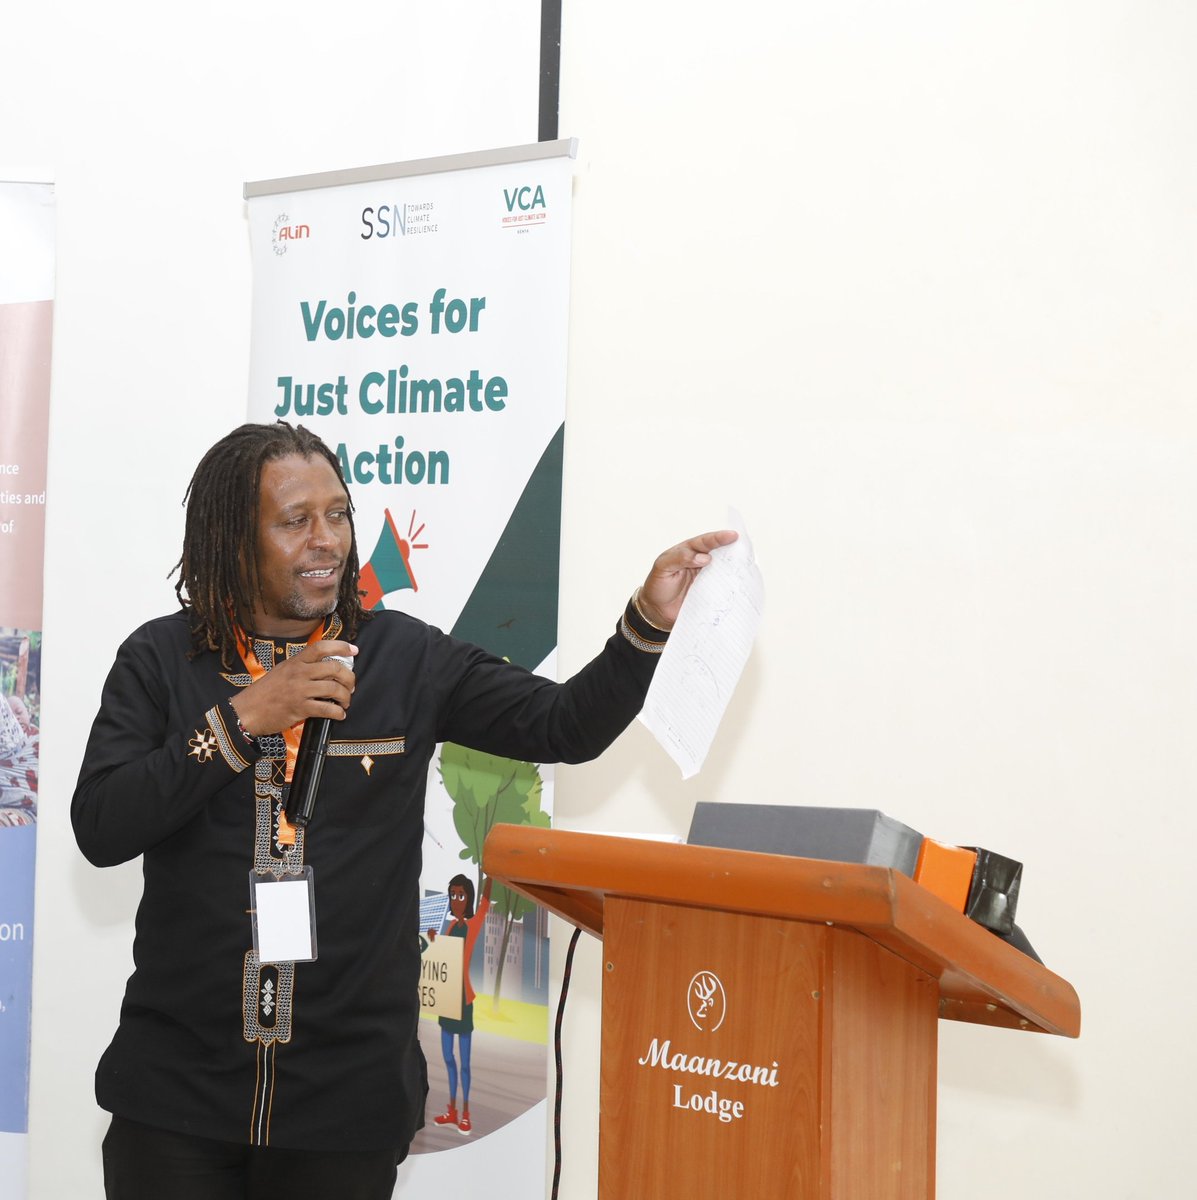 Telling stories of impact and sharing experiences on Climate Justice is at the core of our work. At the @teampuppet and @kenya_puppet we strive to share conversations with communities using creative means #WeAreVCA #ClimateChangeStories